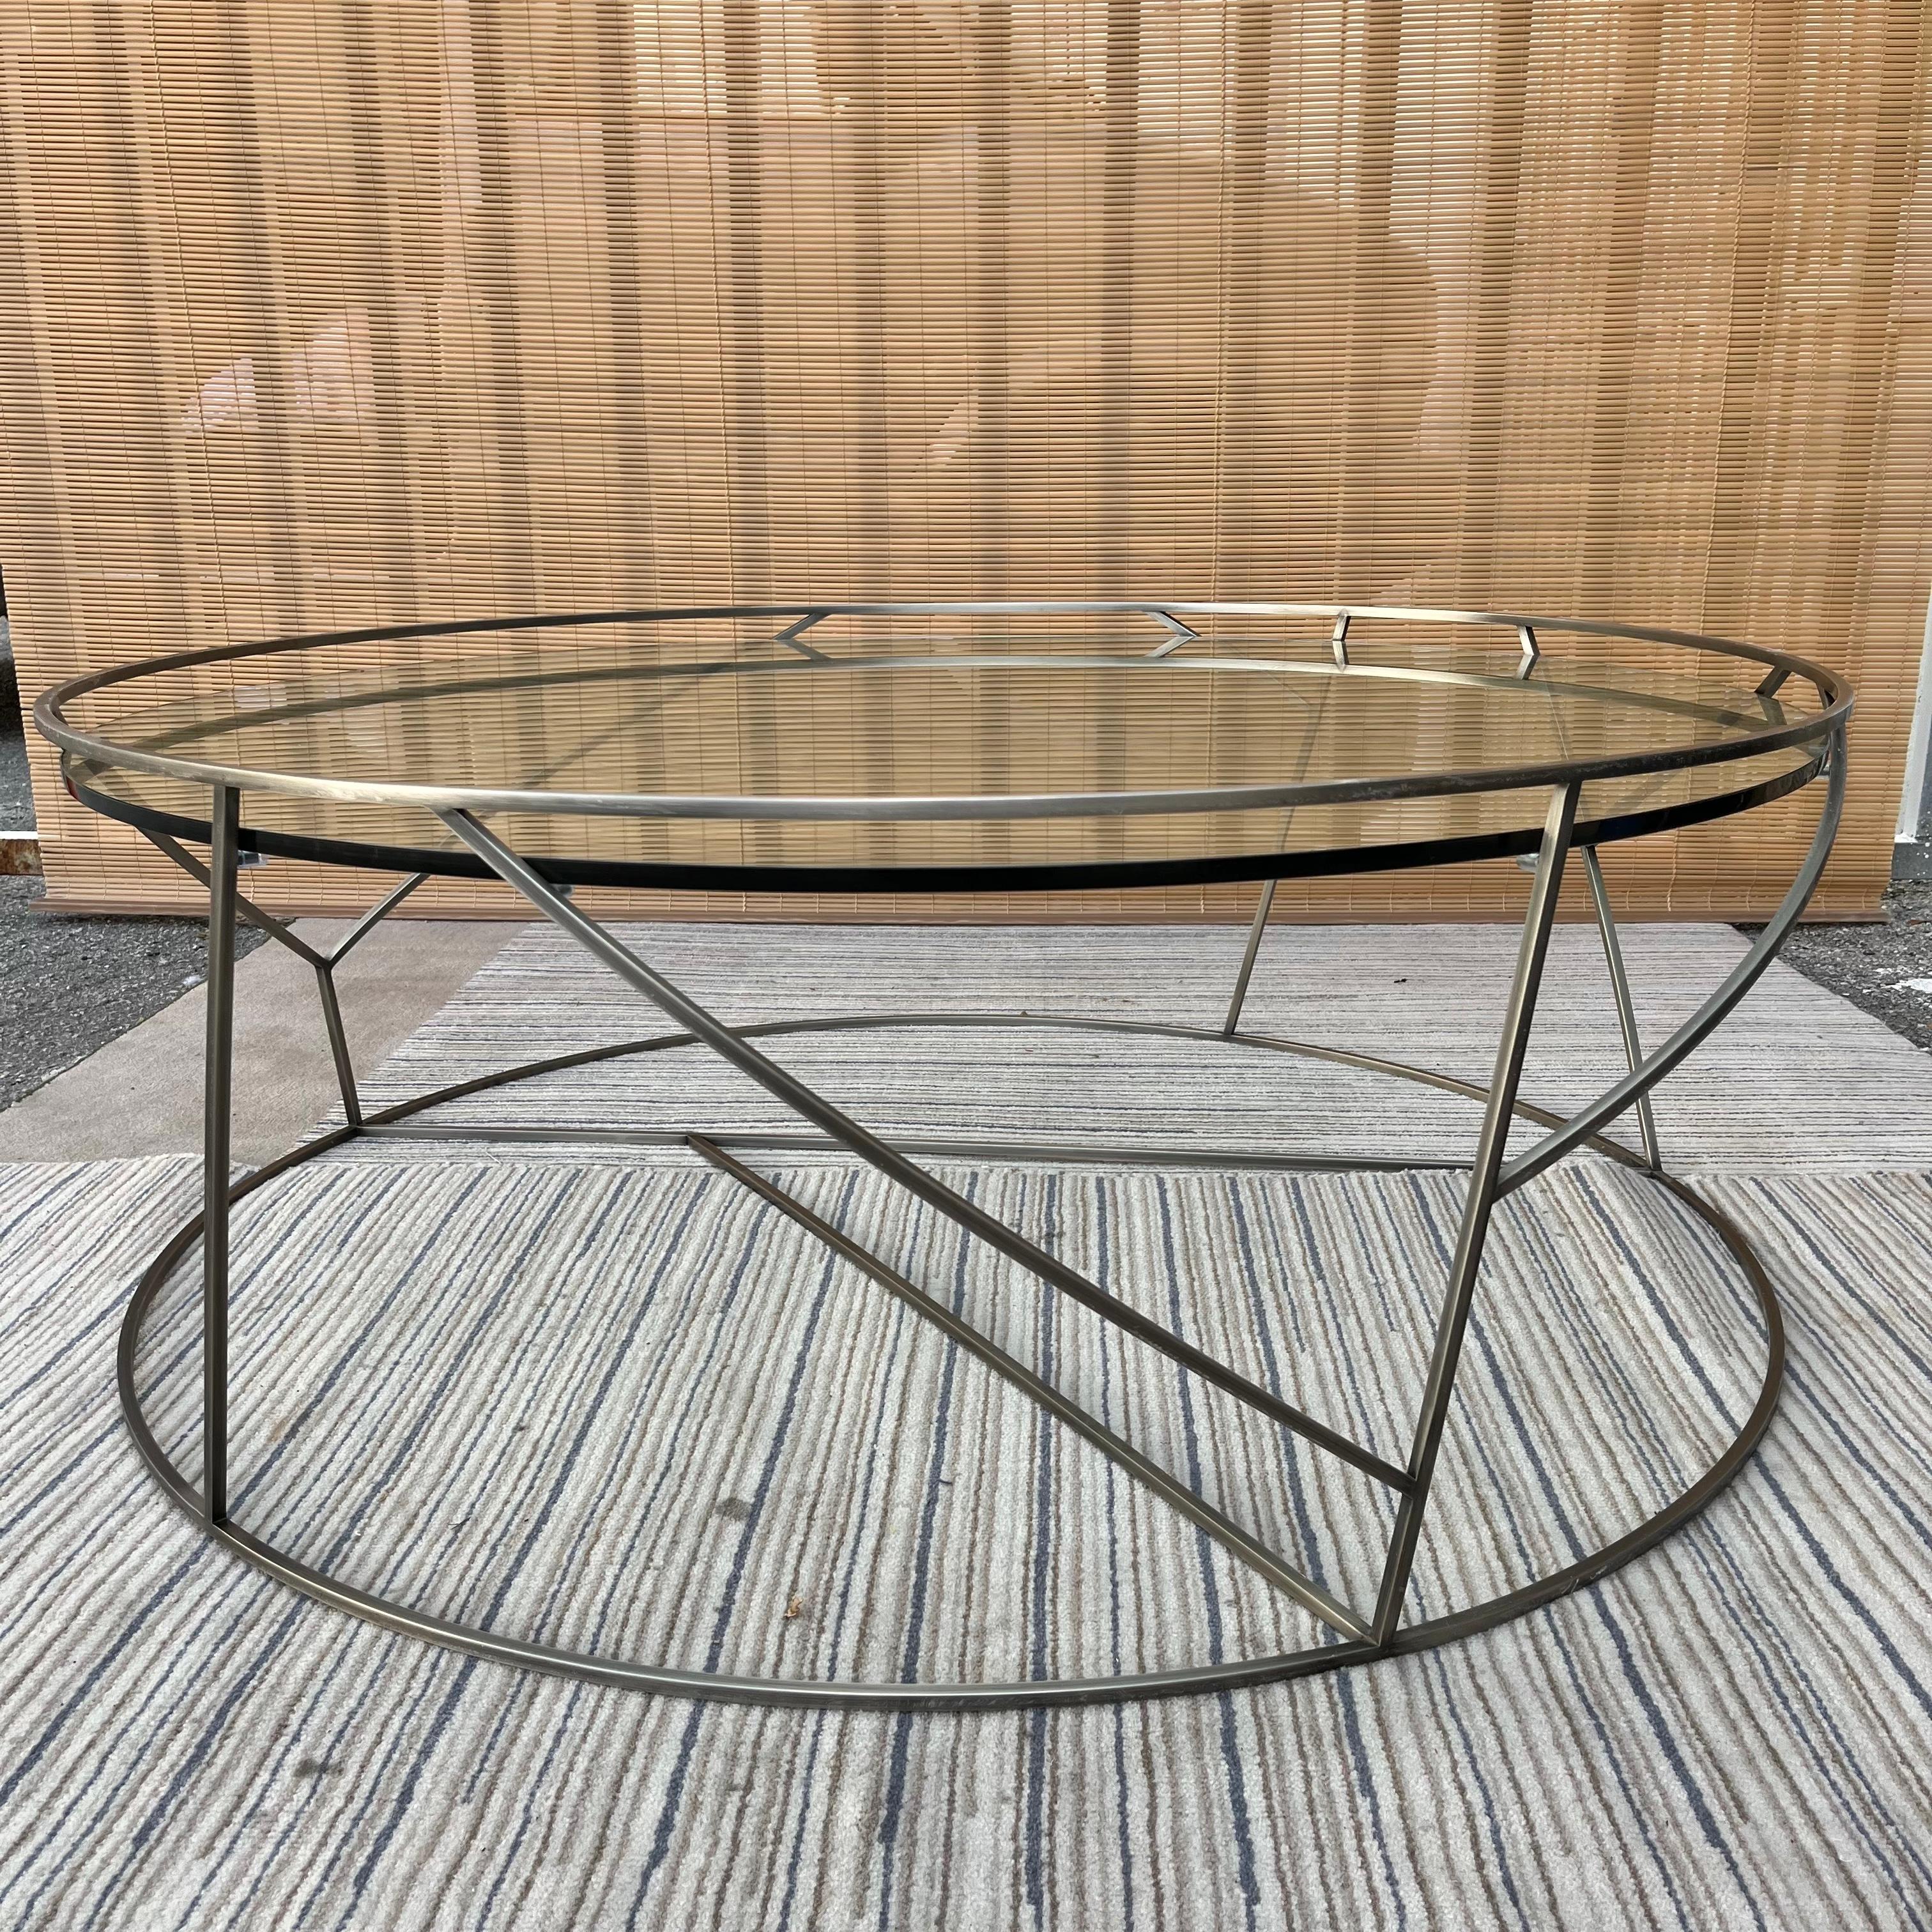 Contemporary Thicket round coffee table by Californian Designer Ted Boerner. Circa Early 21st Century
Inspired by a dense group of indigenous trees in the Anderson Valley of Northern California, Ted Boerner's seamless metal branch-like Thicket